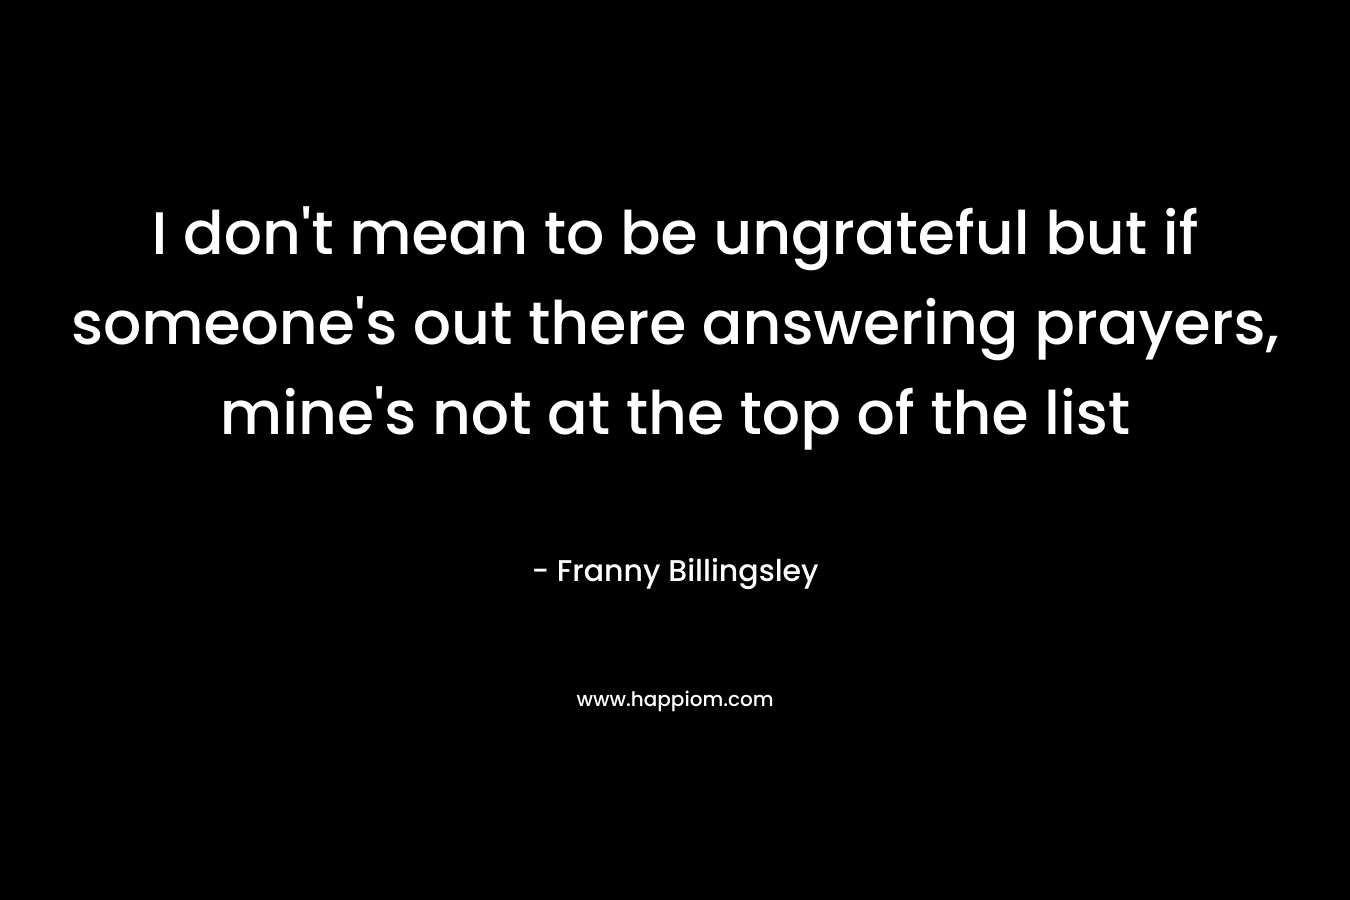 I don’t mean to be ungrateful but if someone’s out there answering prayers, mine’s not at the top of the list – Franny Billingsley